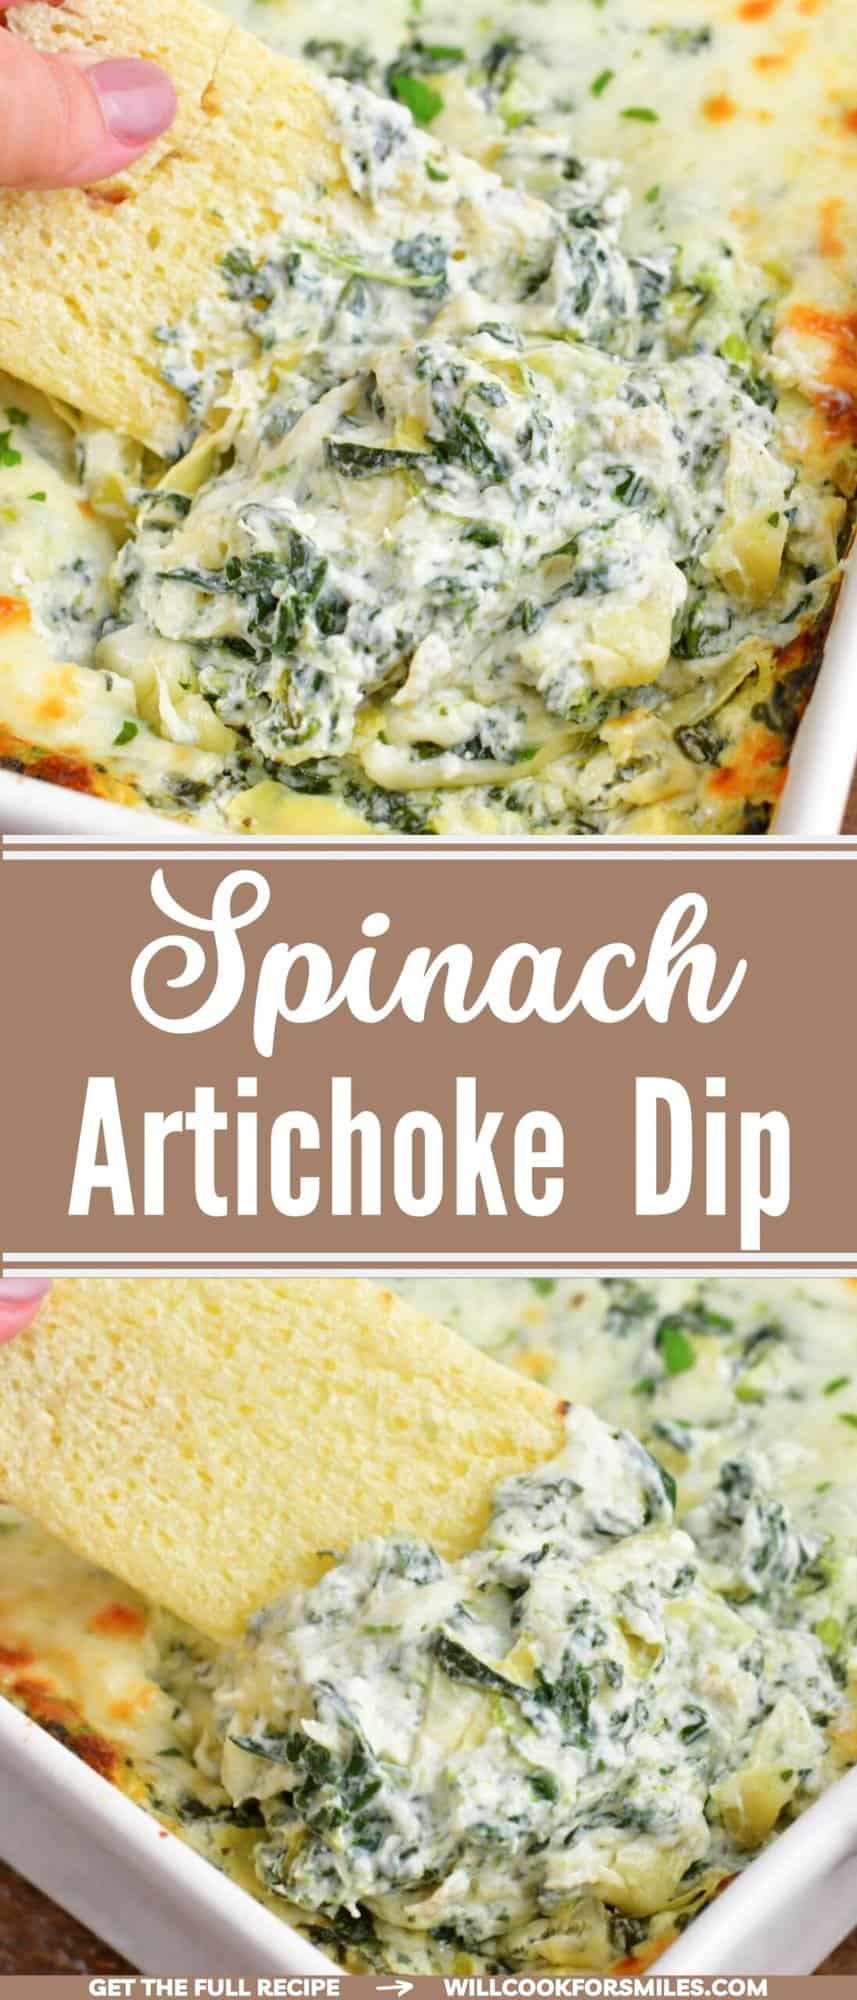 collage of two closeup images of spinach dip and title.